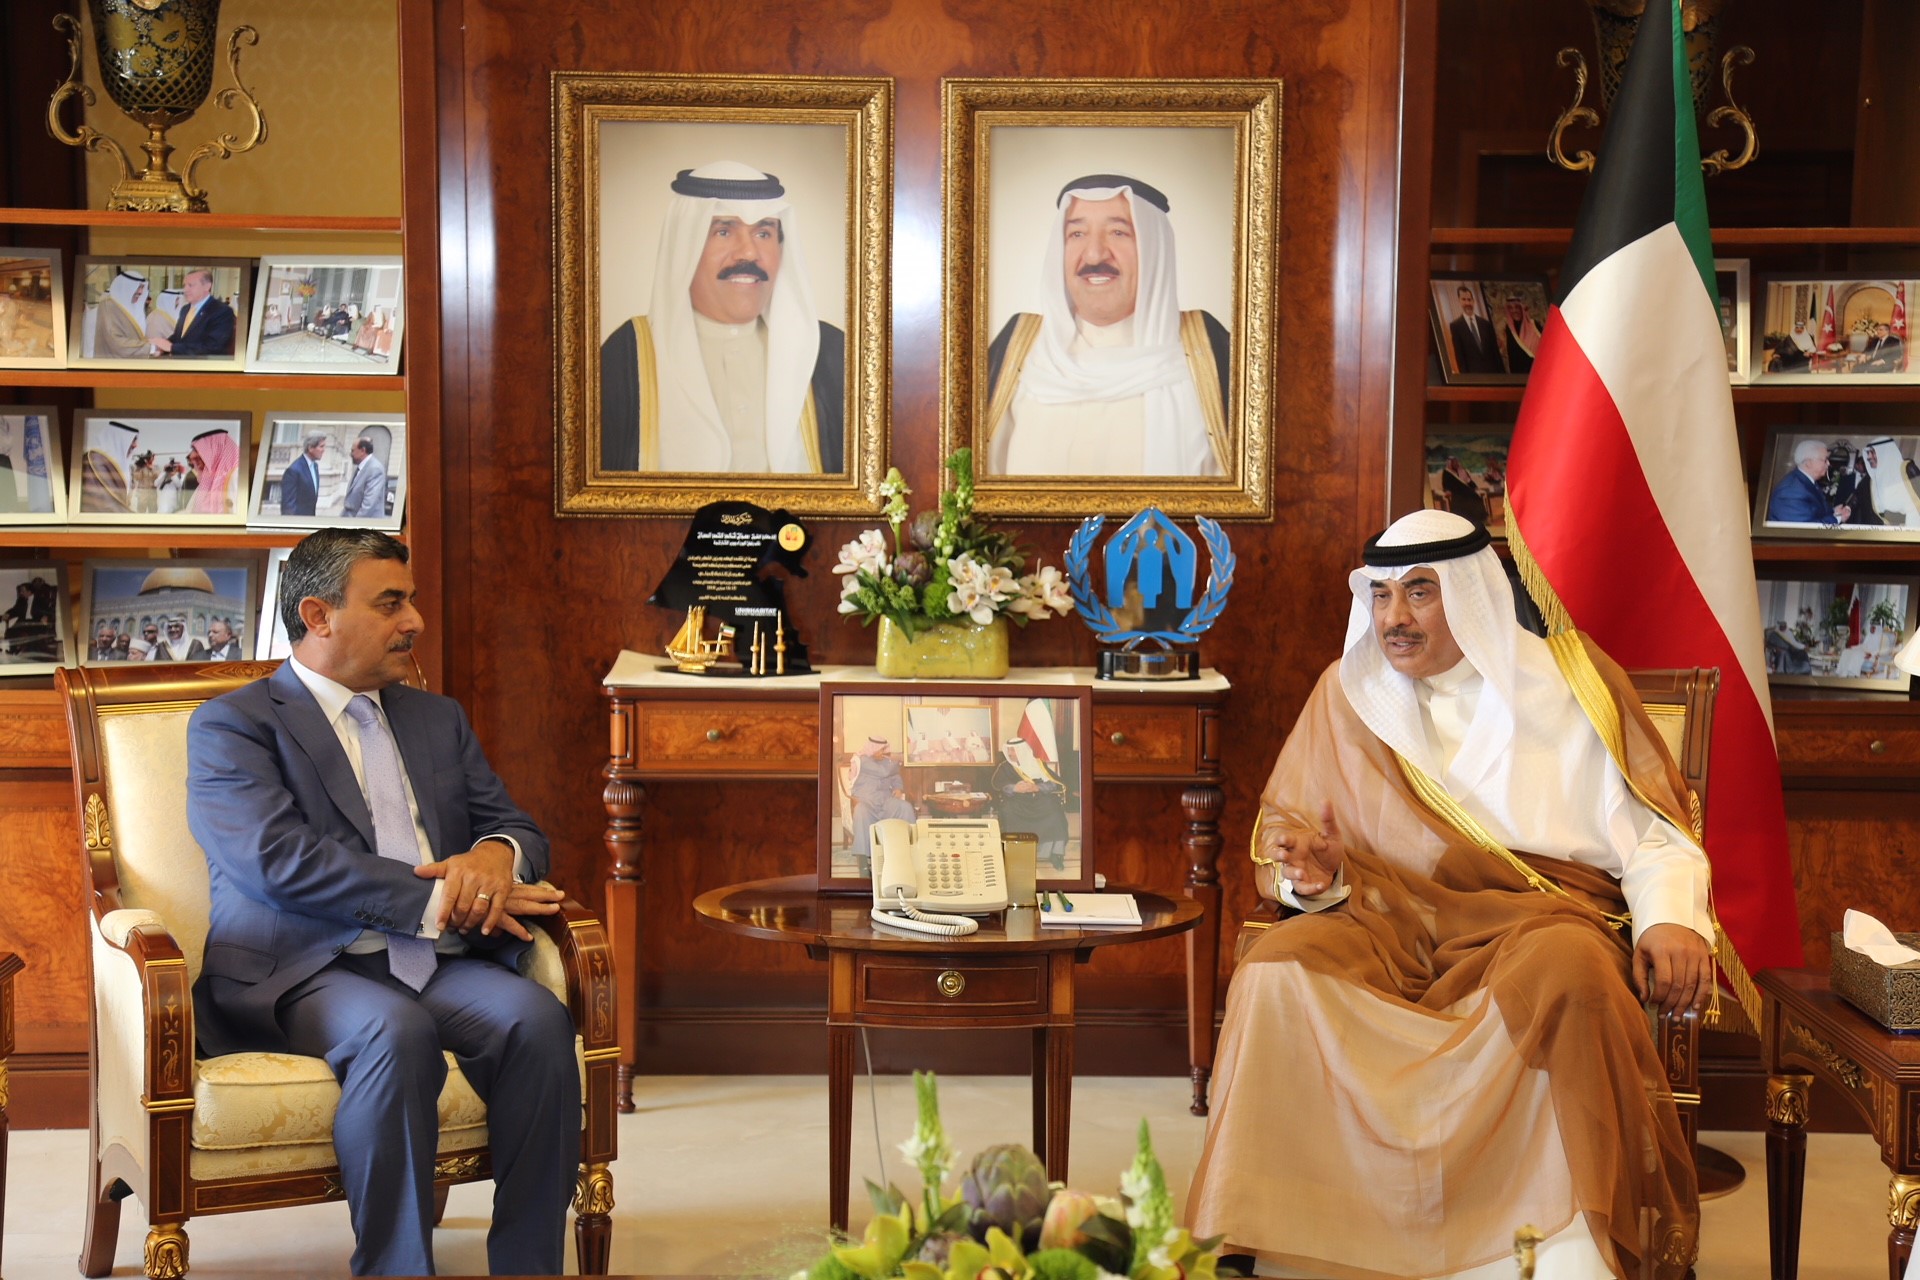 Minister of Foreign Affairs Sheikh Sabah Al-Khaled Al-Hamad Al-Sabah receives Iraq's Cabinet Secretary General Mahdi Al-Alaq, and head of the Reconstruction Fund of Areas Affected by Terrorist Operations Dr. Mustafa Al-Hiti.